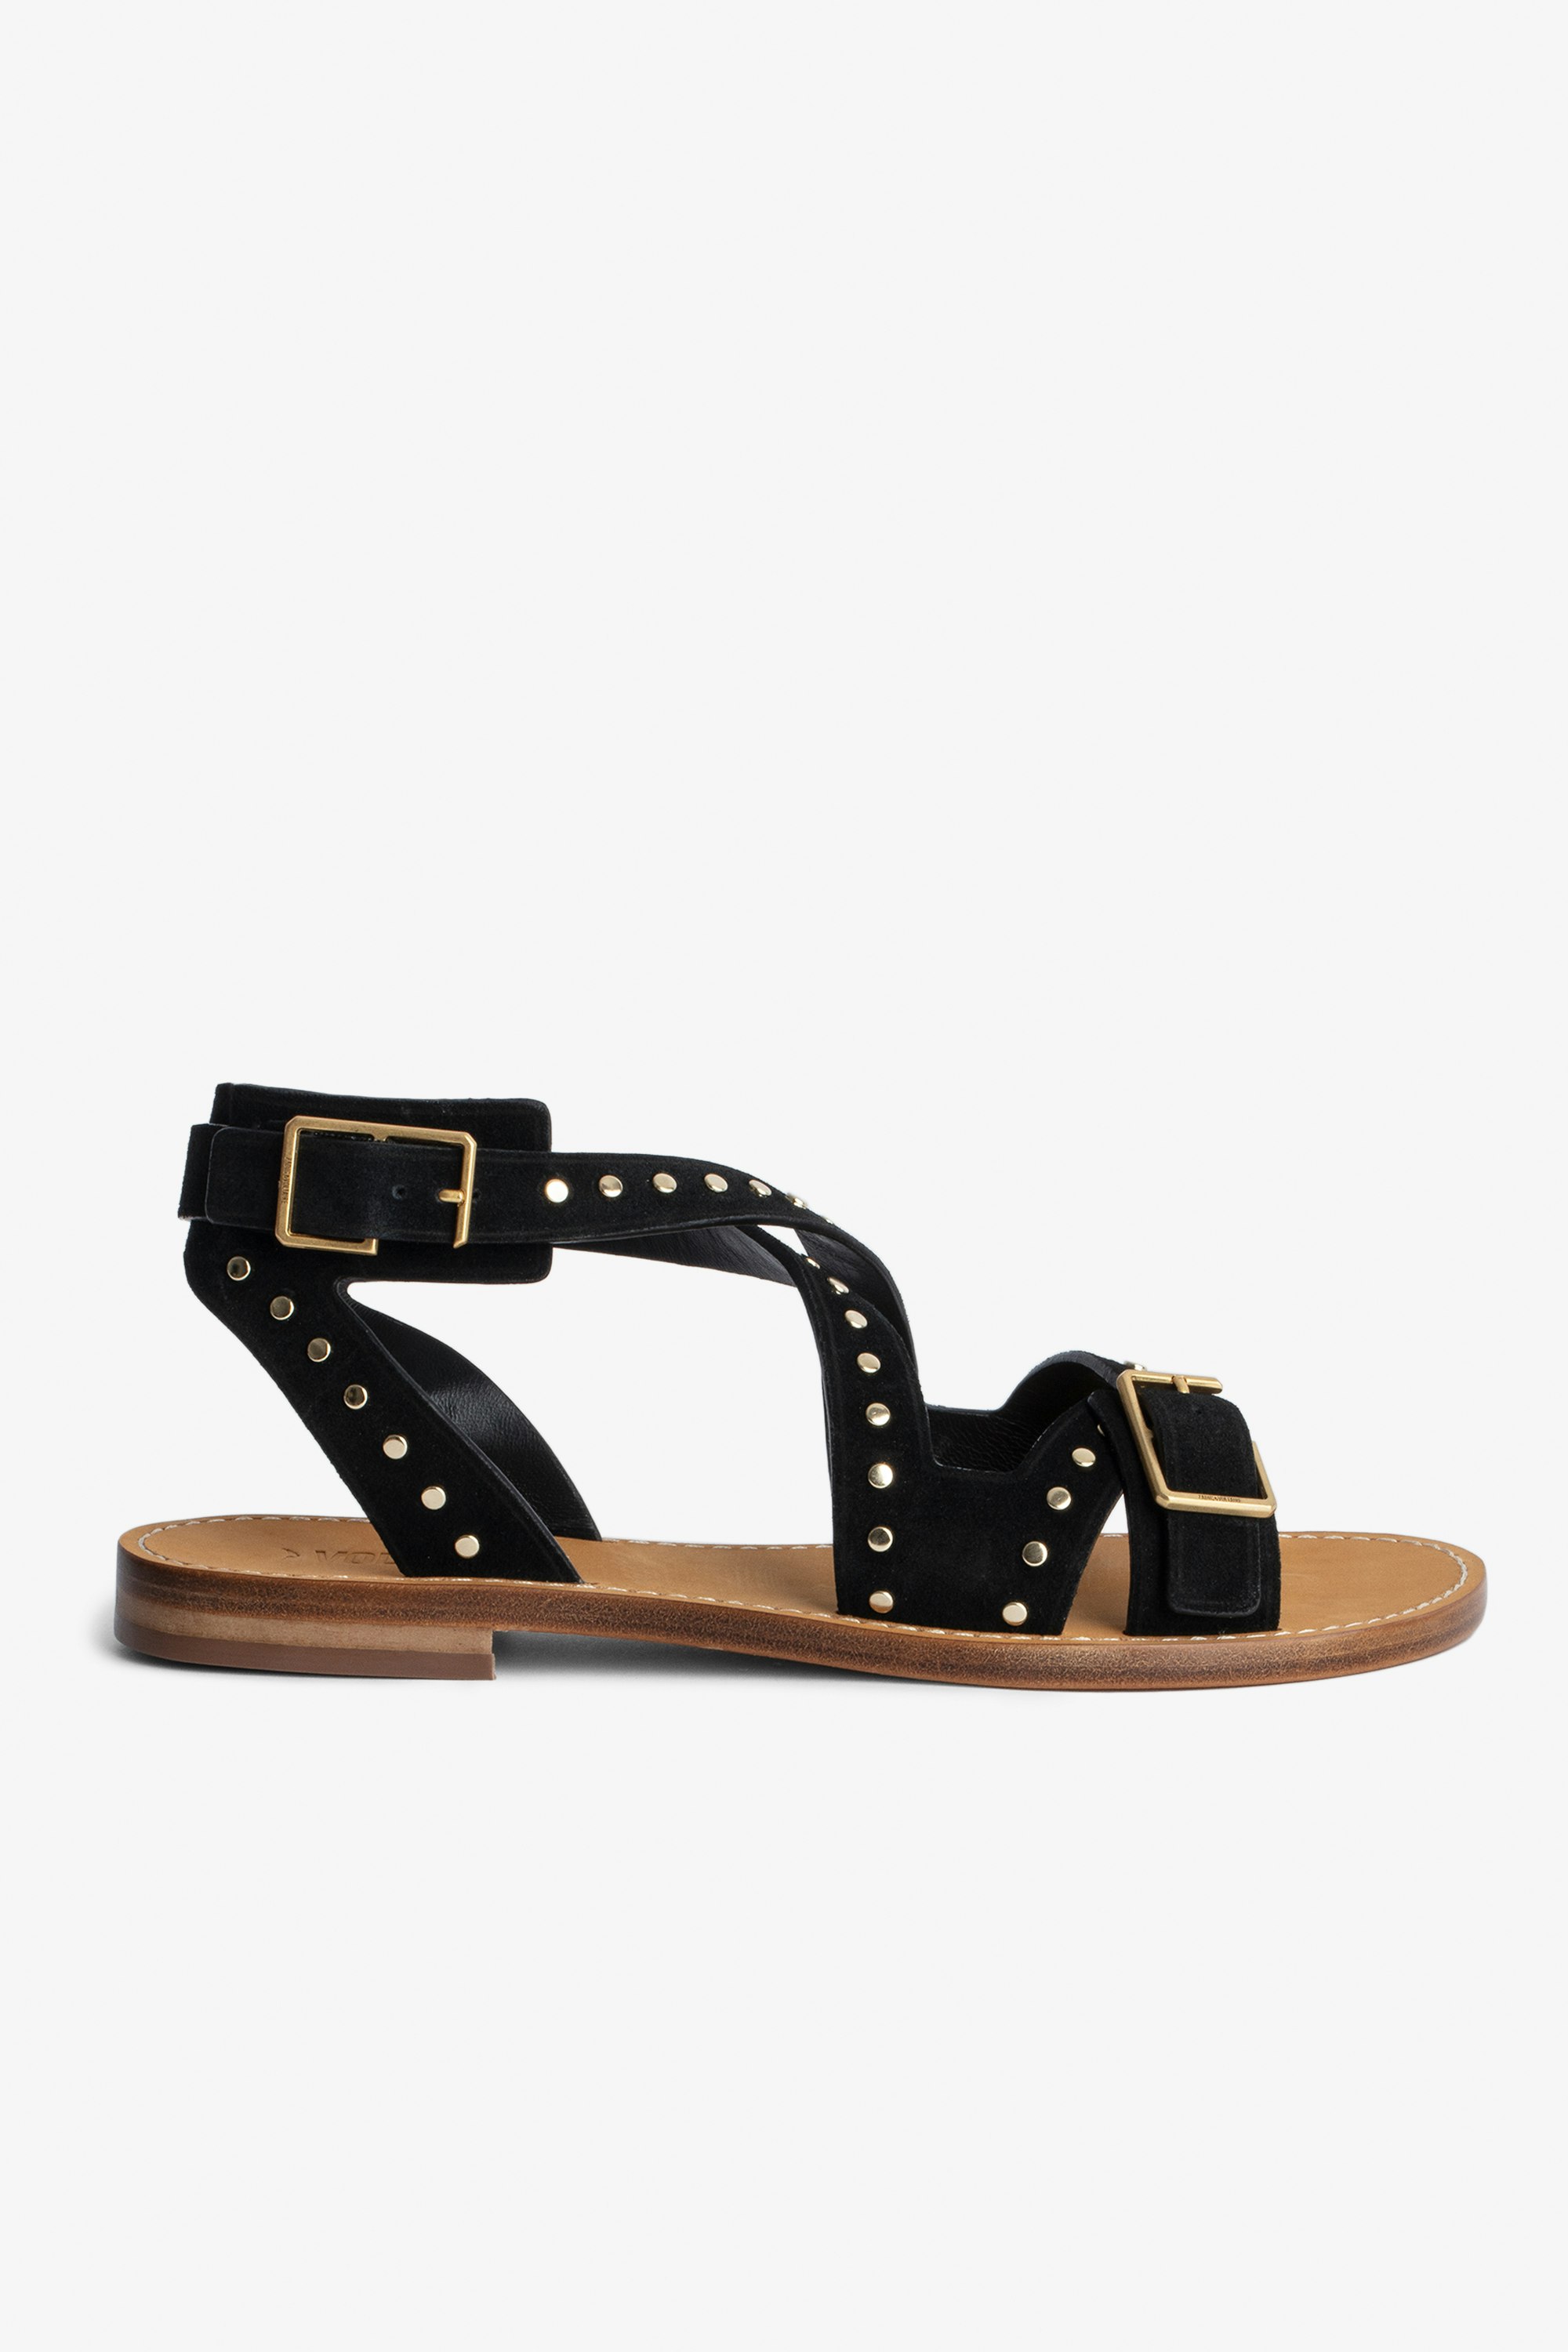 Cecilia Studs Caprese Sandals - Women's black suede sandals with studs, straps and gold C-shaped buckles